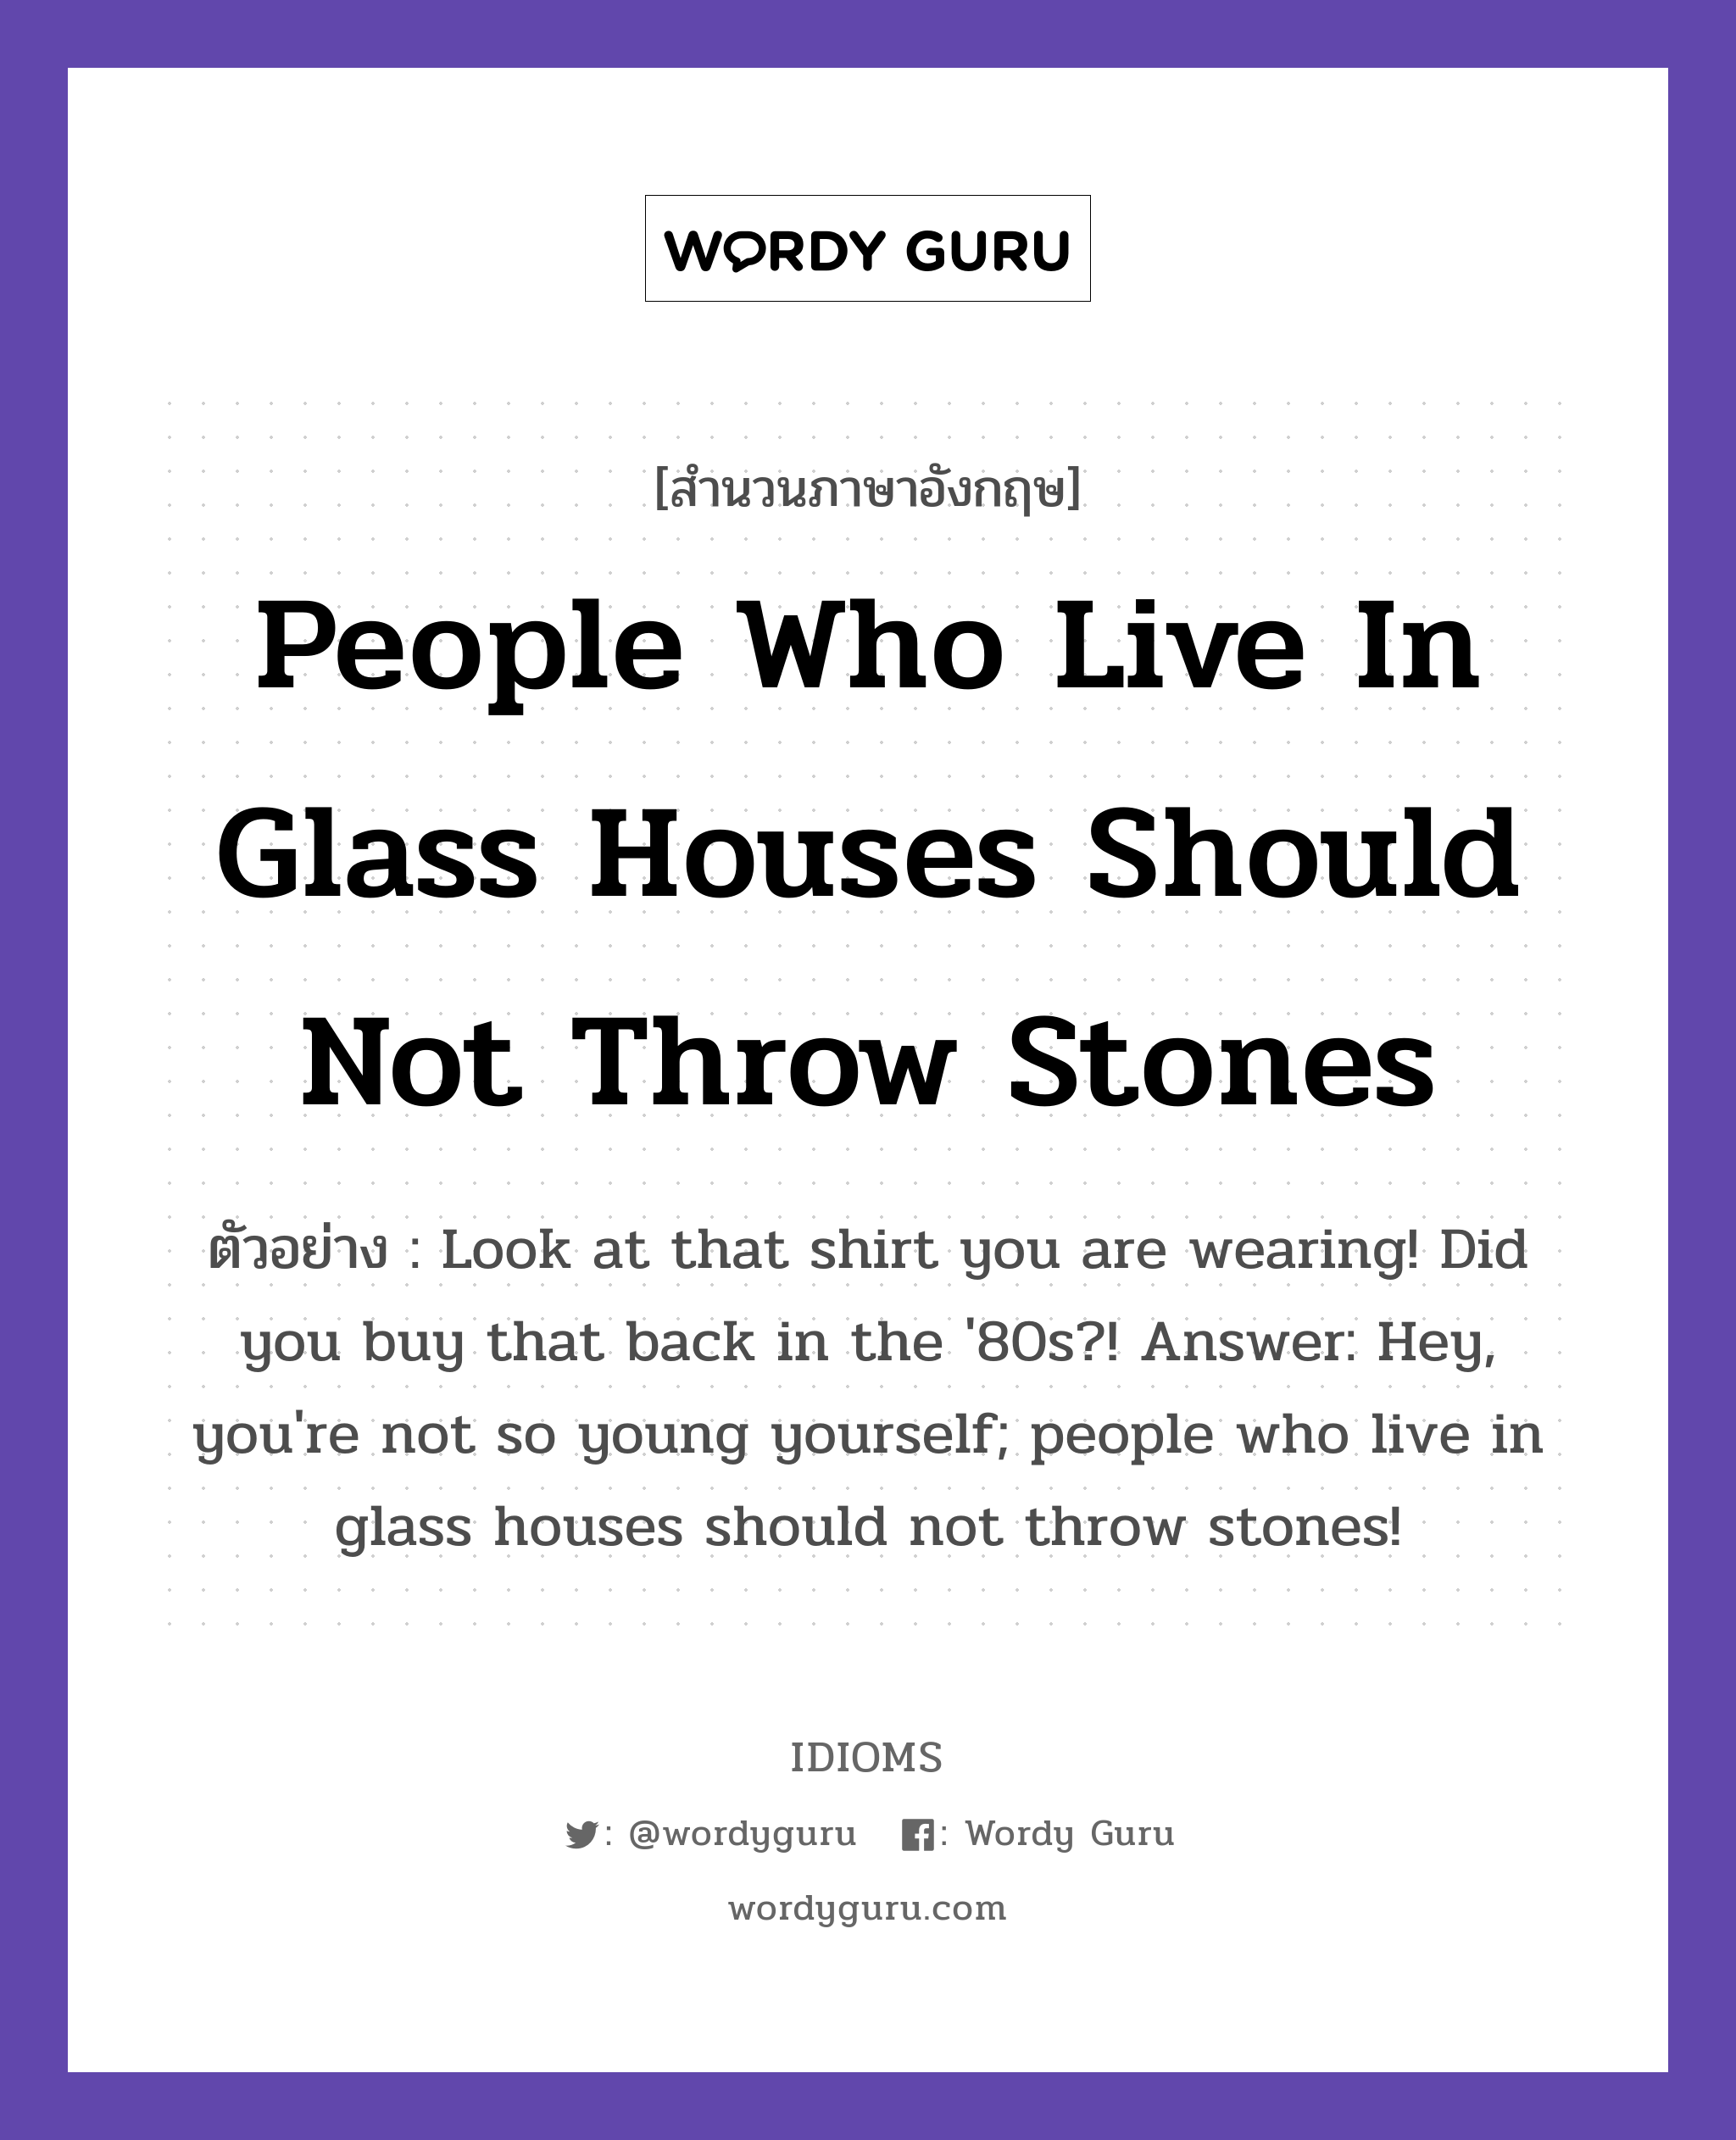 People Who Live In Glass Houses Should Not Throw Stones แปลว่า?, สำนวนภาษาอังกฤษ People Who Live In Glass Houses Should Not Throw Stones ตัวอย่าง Look at that shirt you are wearing! Did you buy that back in the '80s?! Answer: Hey, you're not so young yourself; people who live in glass houses should not throw stones!